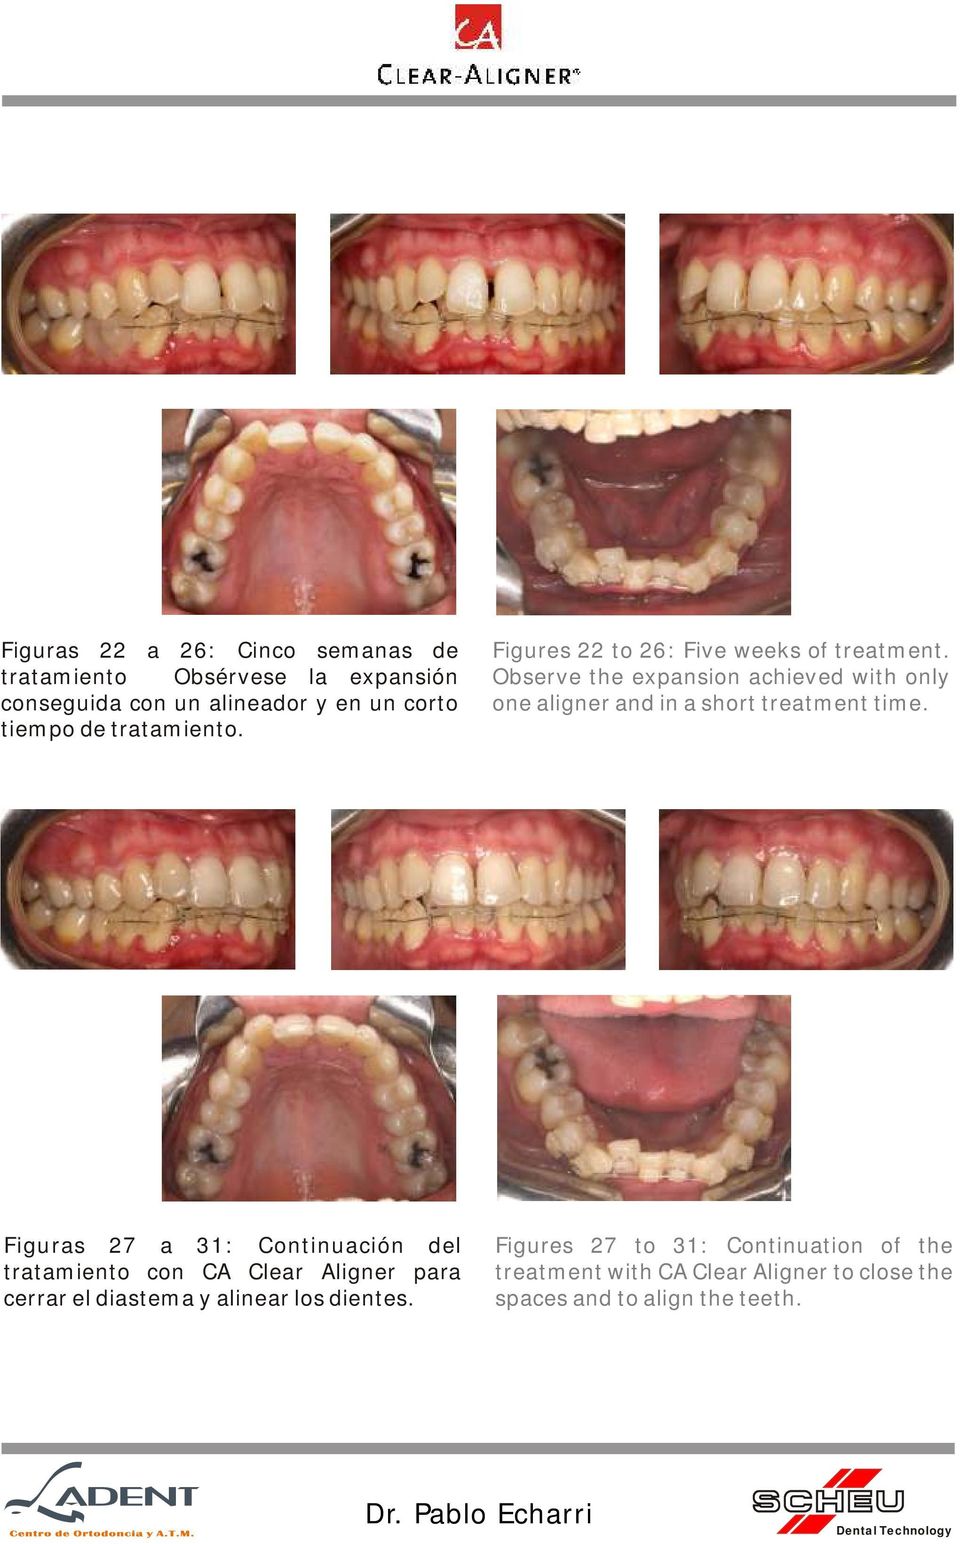 Observe the expansion achieved with only one aligner and in a short treatment time.